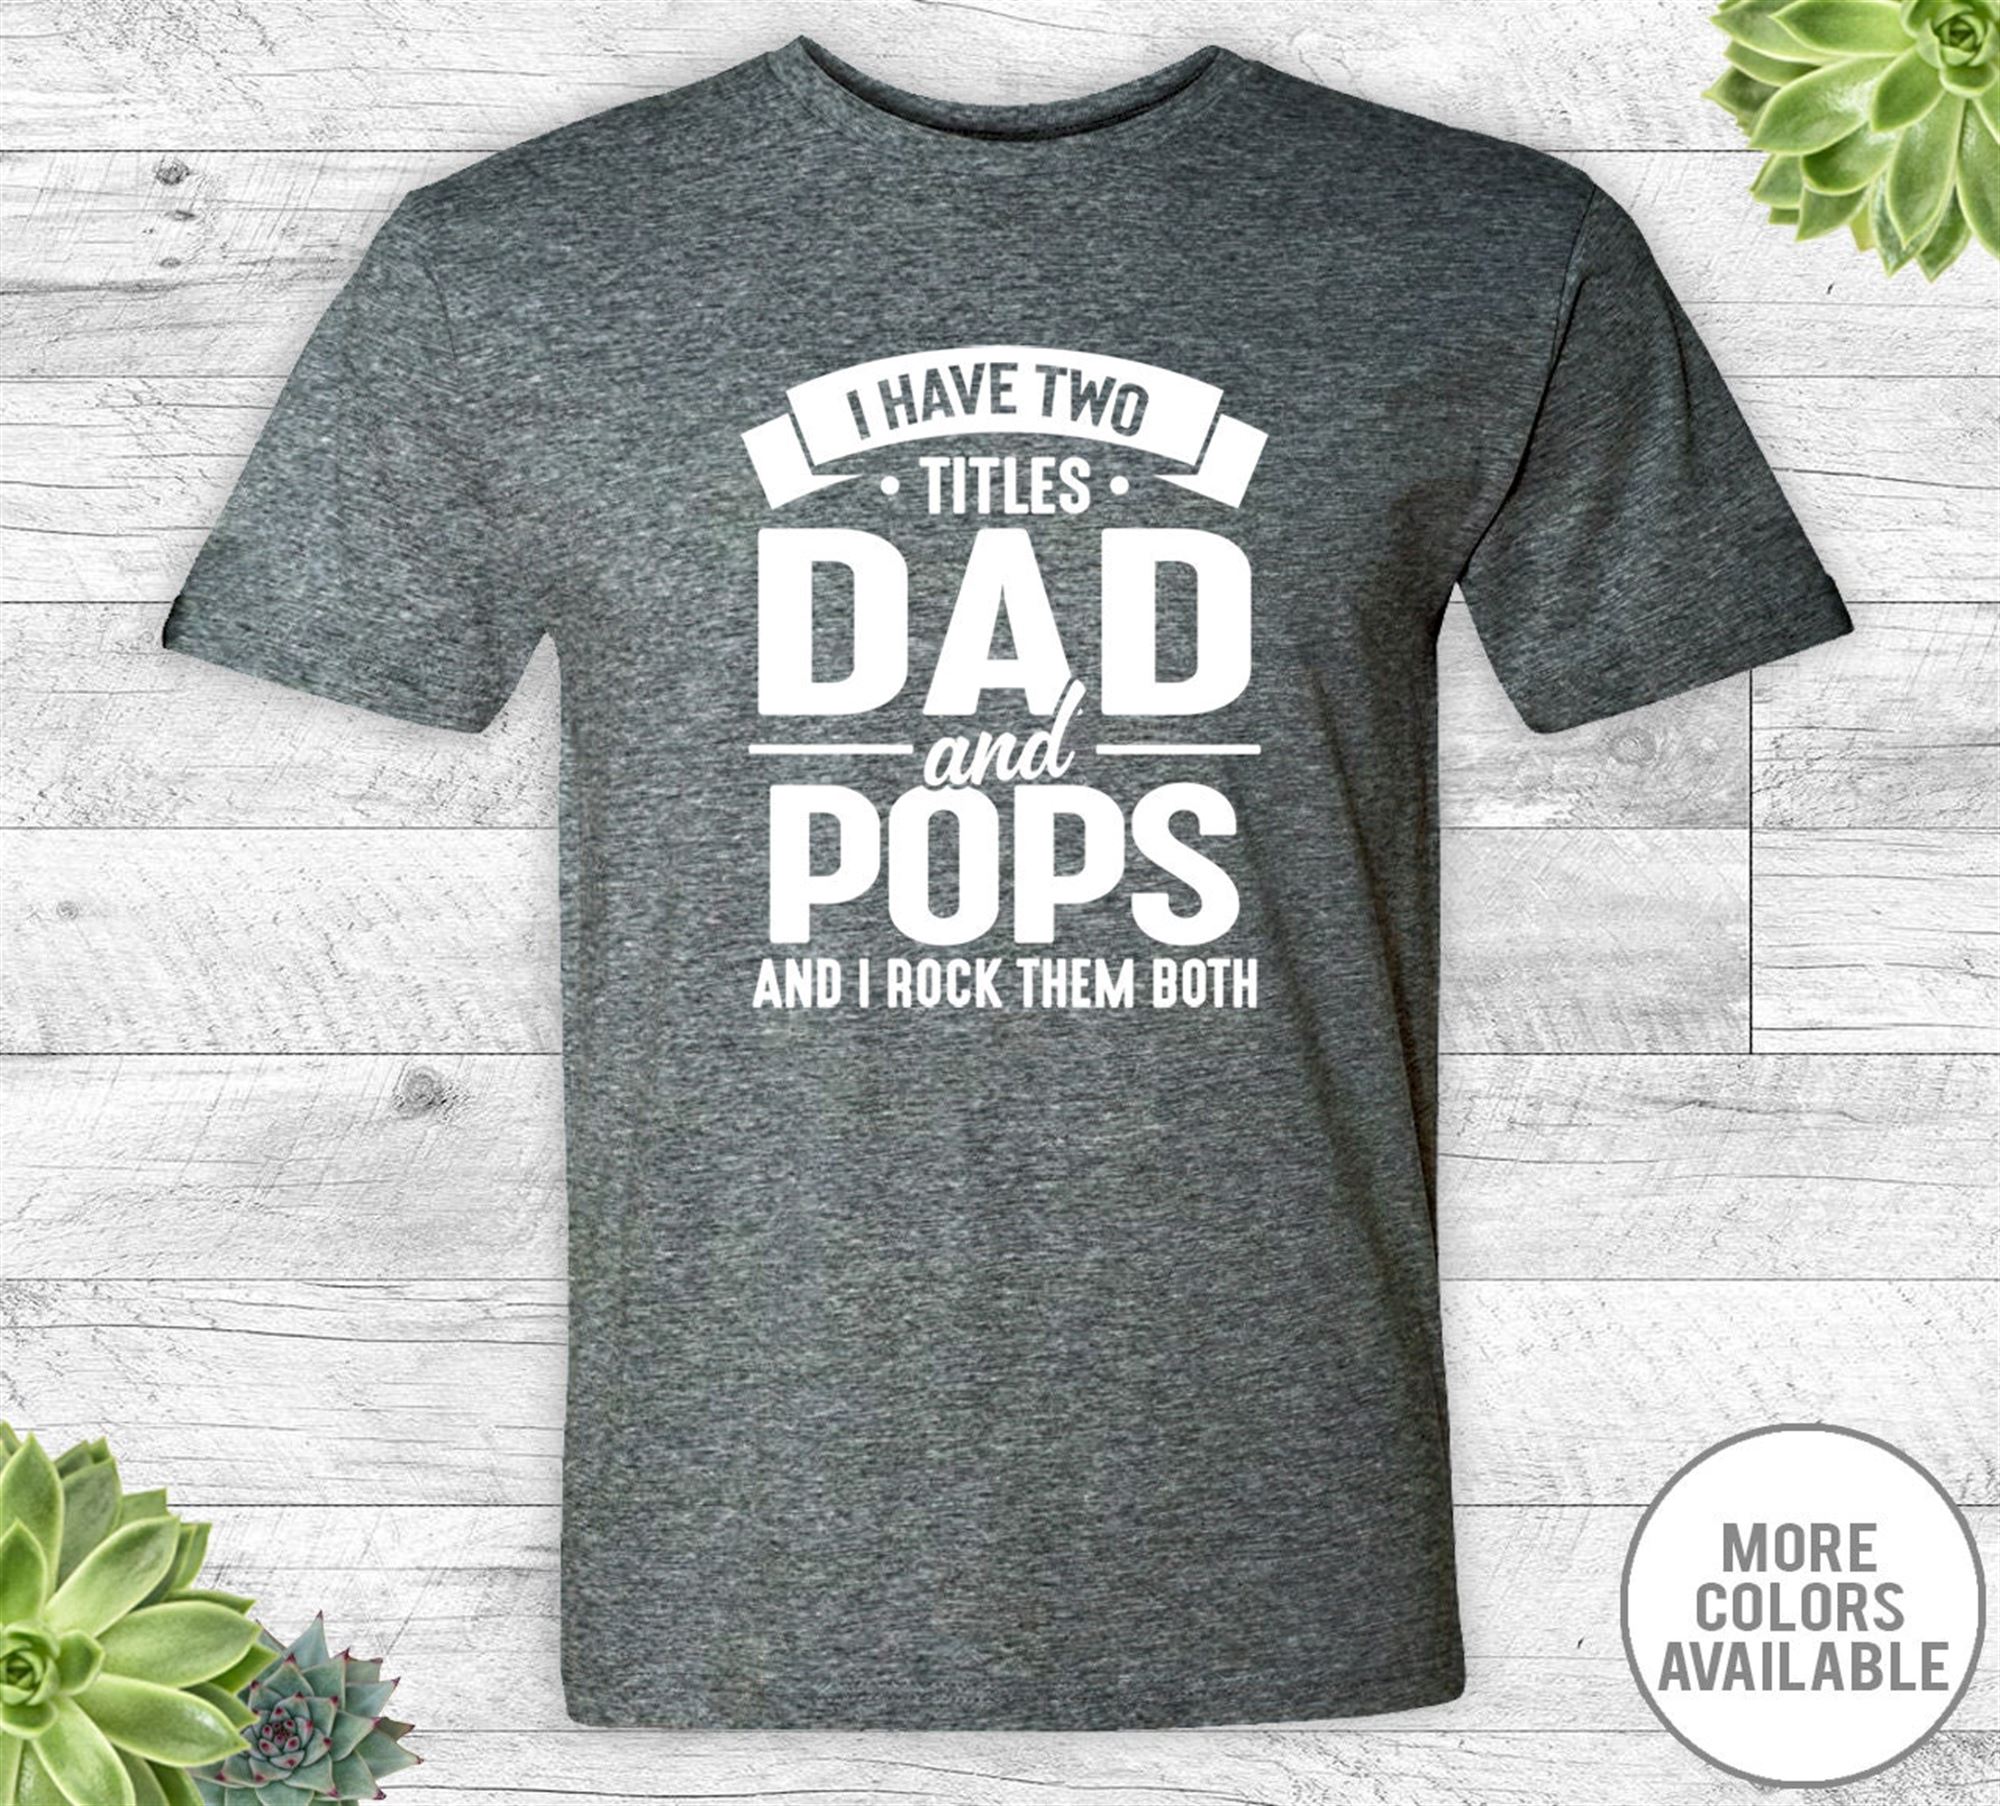 Attractive I Have Two Titles Dad And Pops And I Rock Them Both - Unisex Shirt - Pops Shirt - Pops Gift - New Pops 